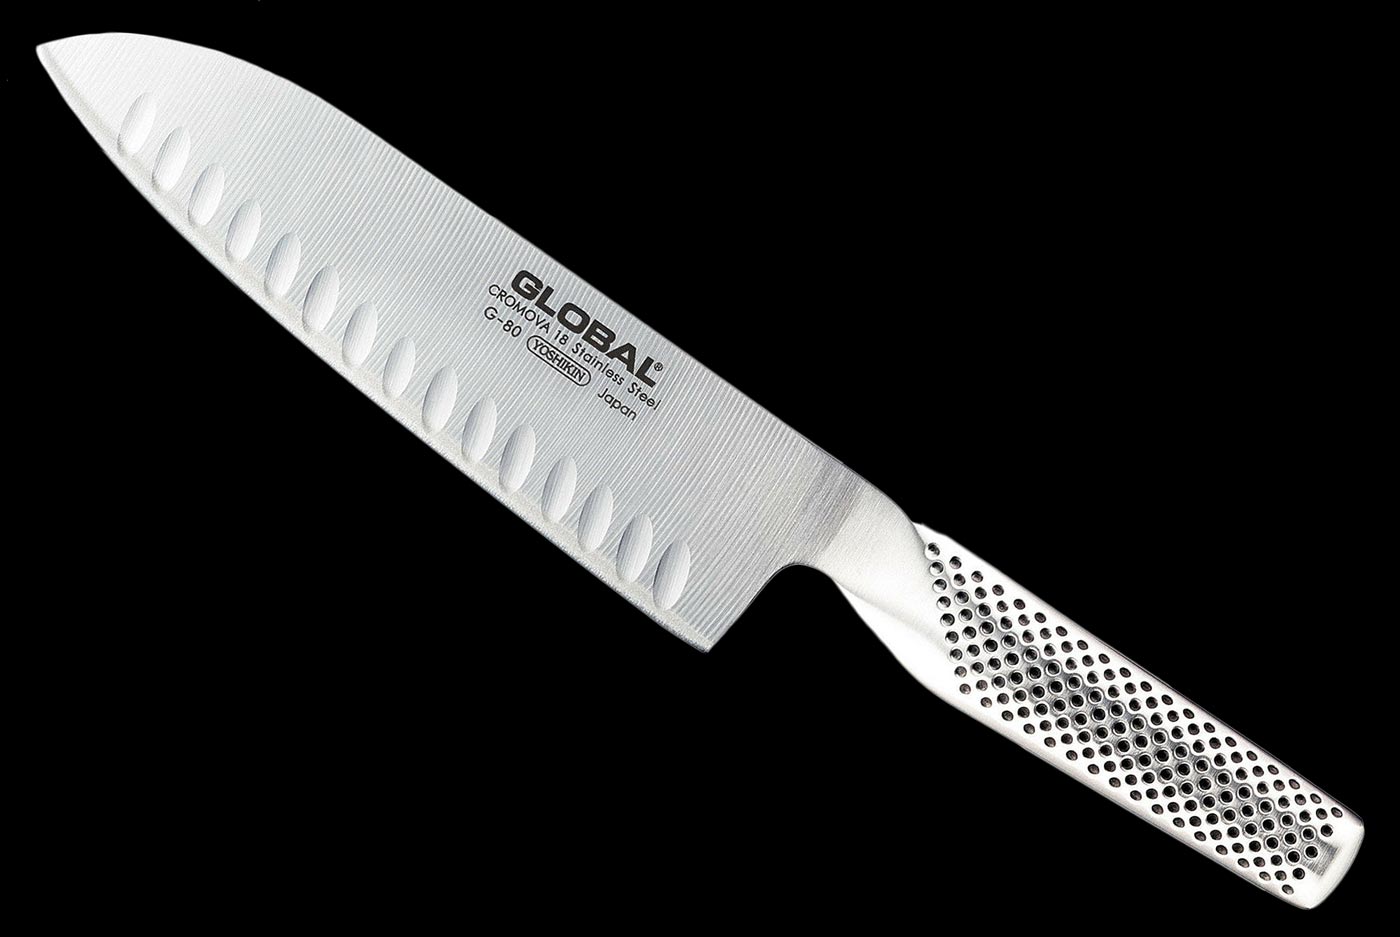 Global Santoku (Chef's Knife) with Granton (Fluted) Edge - 7in. (G-80)